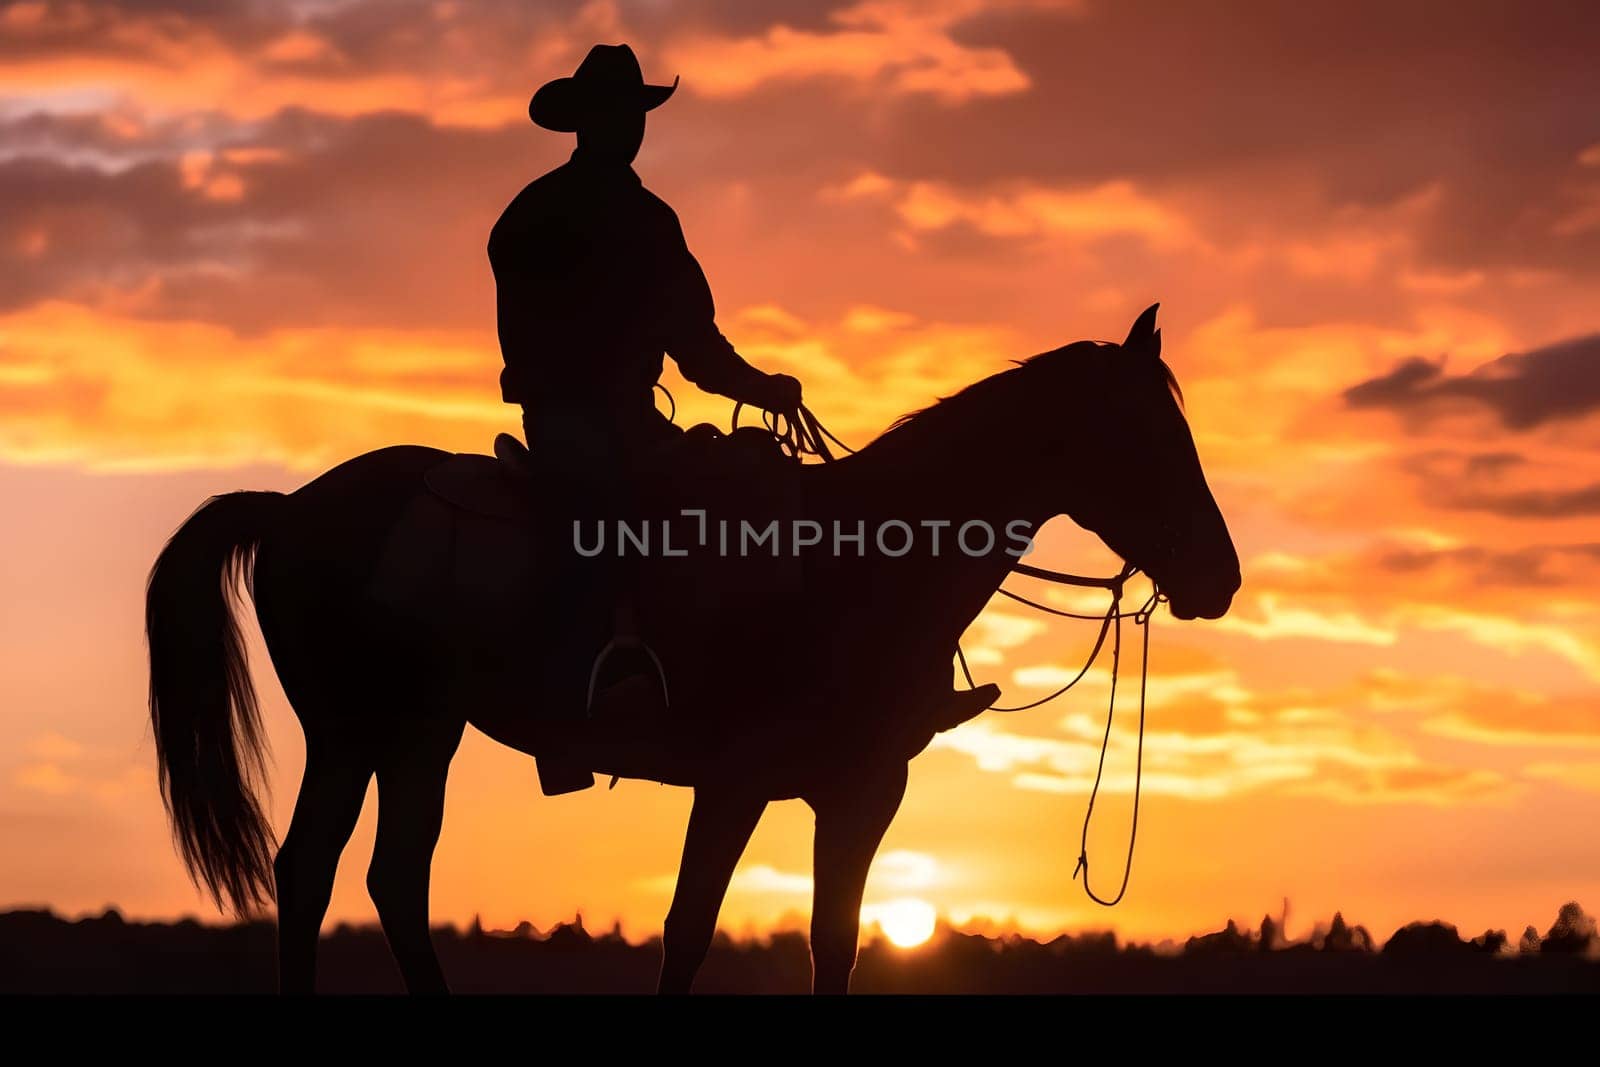 Silhouette of a cowboy on a horse at sunset. Neural network generated in May 2023. Not based on any actual person, scene or pattern.